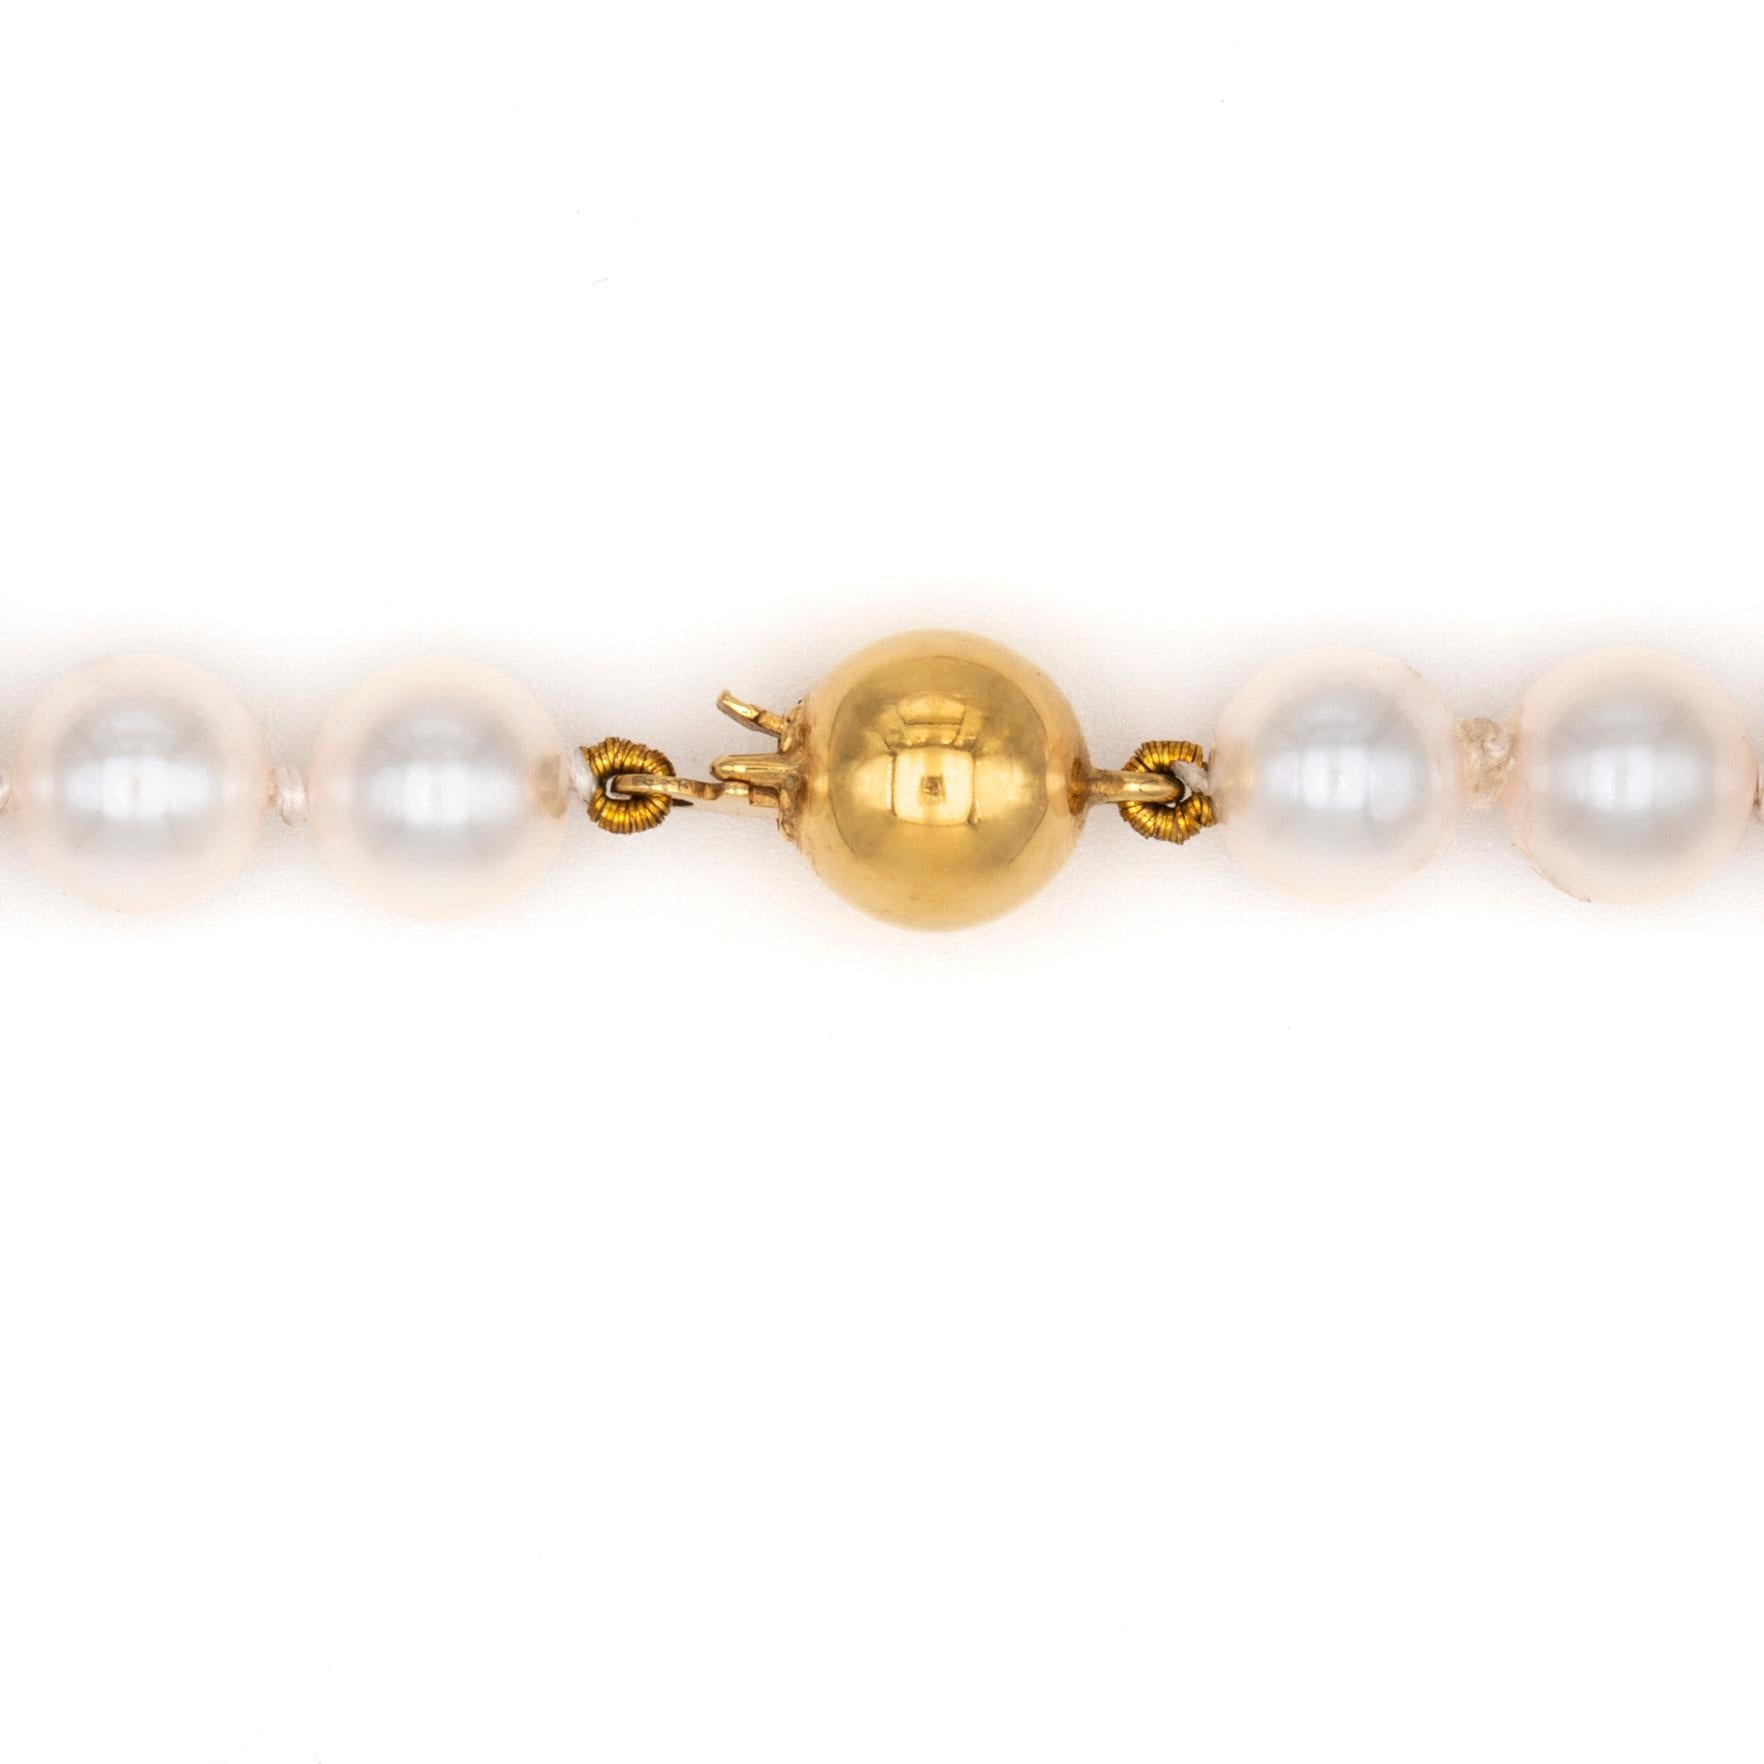 A cultured pearl necklace, the single row consisted of fifty-nine saltwater cultured pearls, with diameter 5.5-6mm, to an 18ct gold ball clasp of 6mm diameter, total length 41cm, gross weight 18.2 grams.

This lovely pearl necklace comes from the